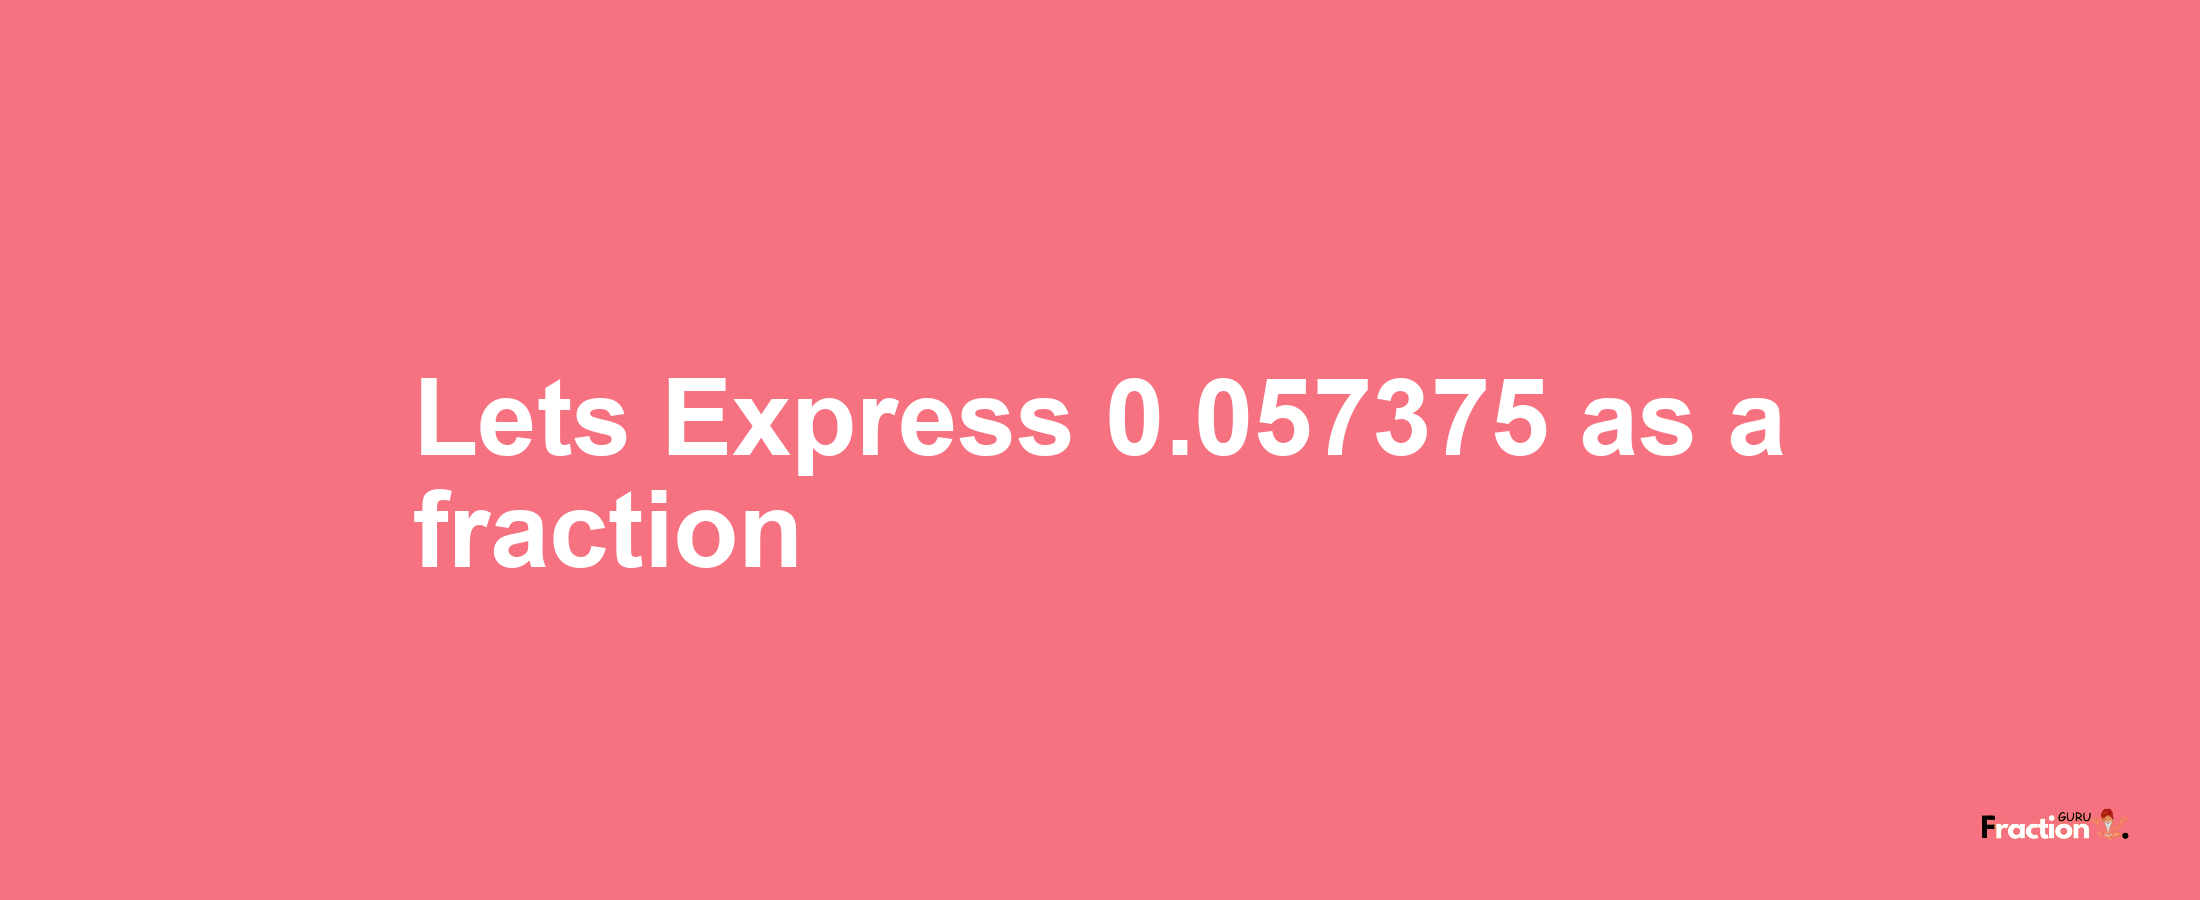 Lets Express 0.057375 as afraction